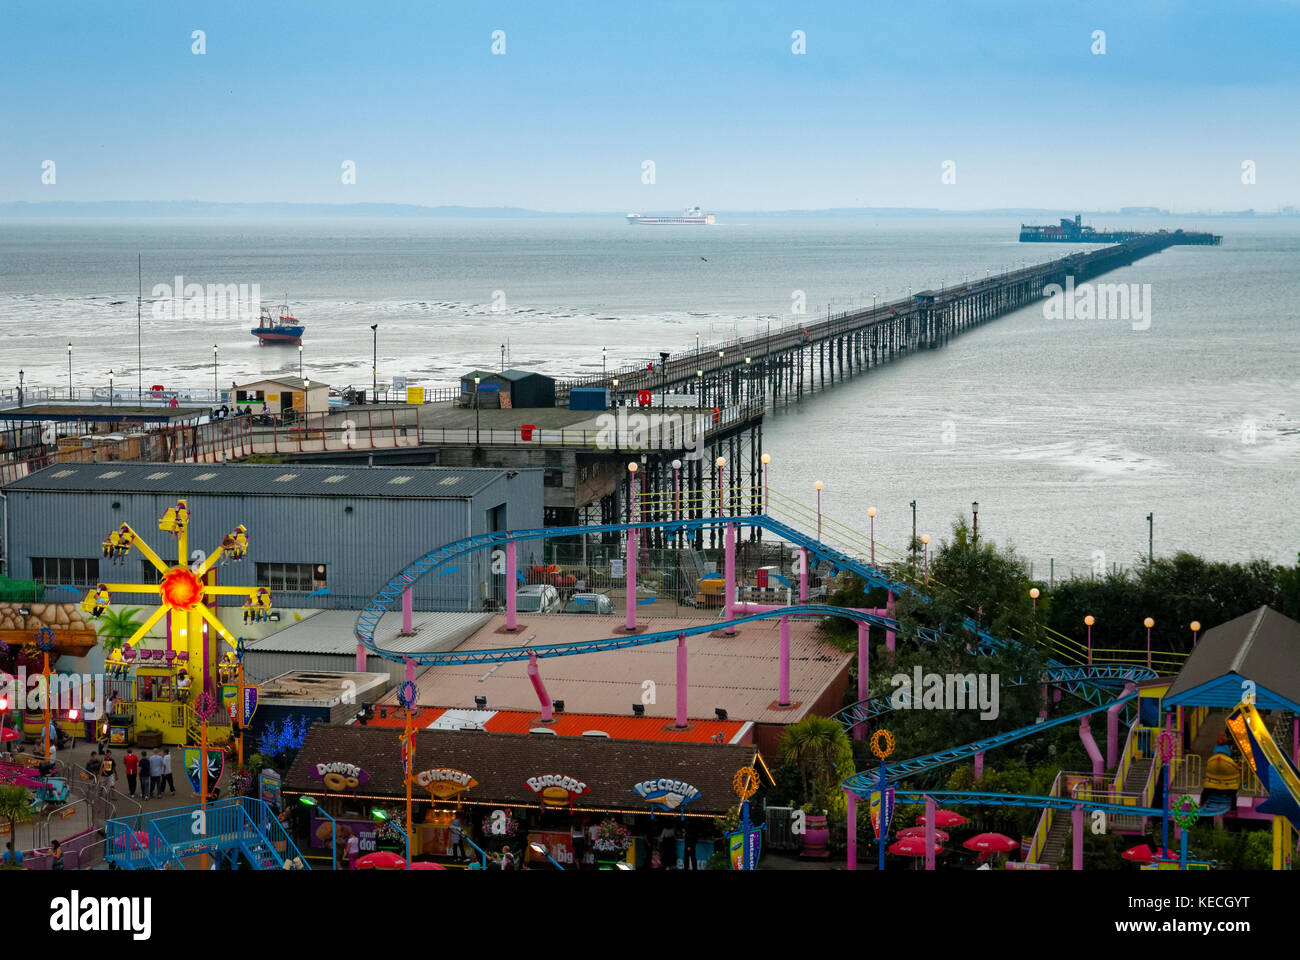 Adventure Island and Southend Pier, The longest pier in the world at 1.34 miles or 2.16 km reaching out into the Thames Estuary. Stock Photo